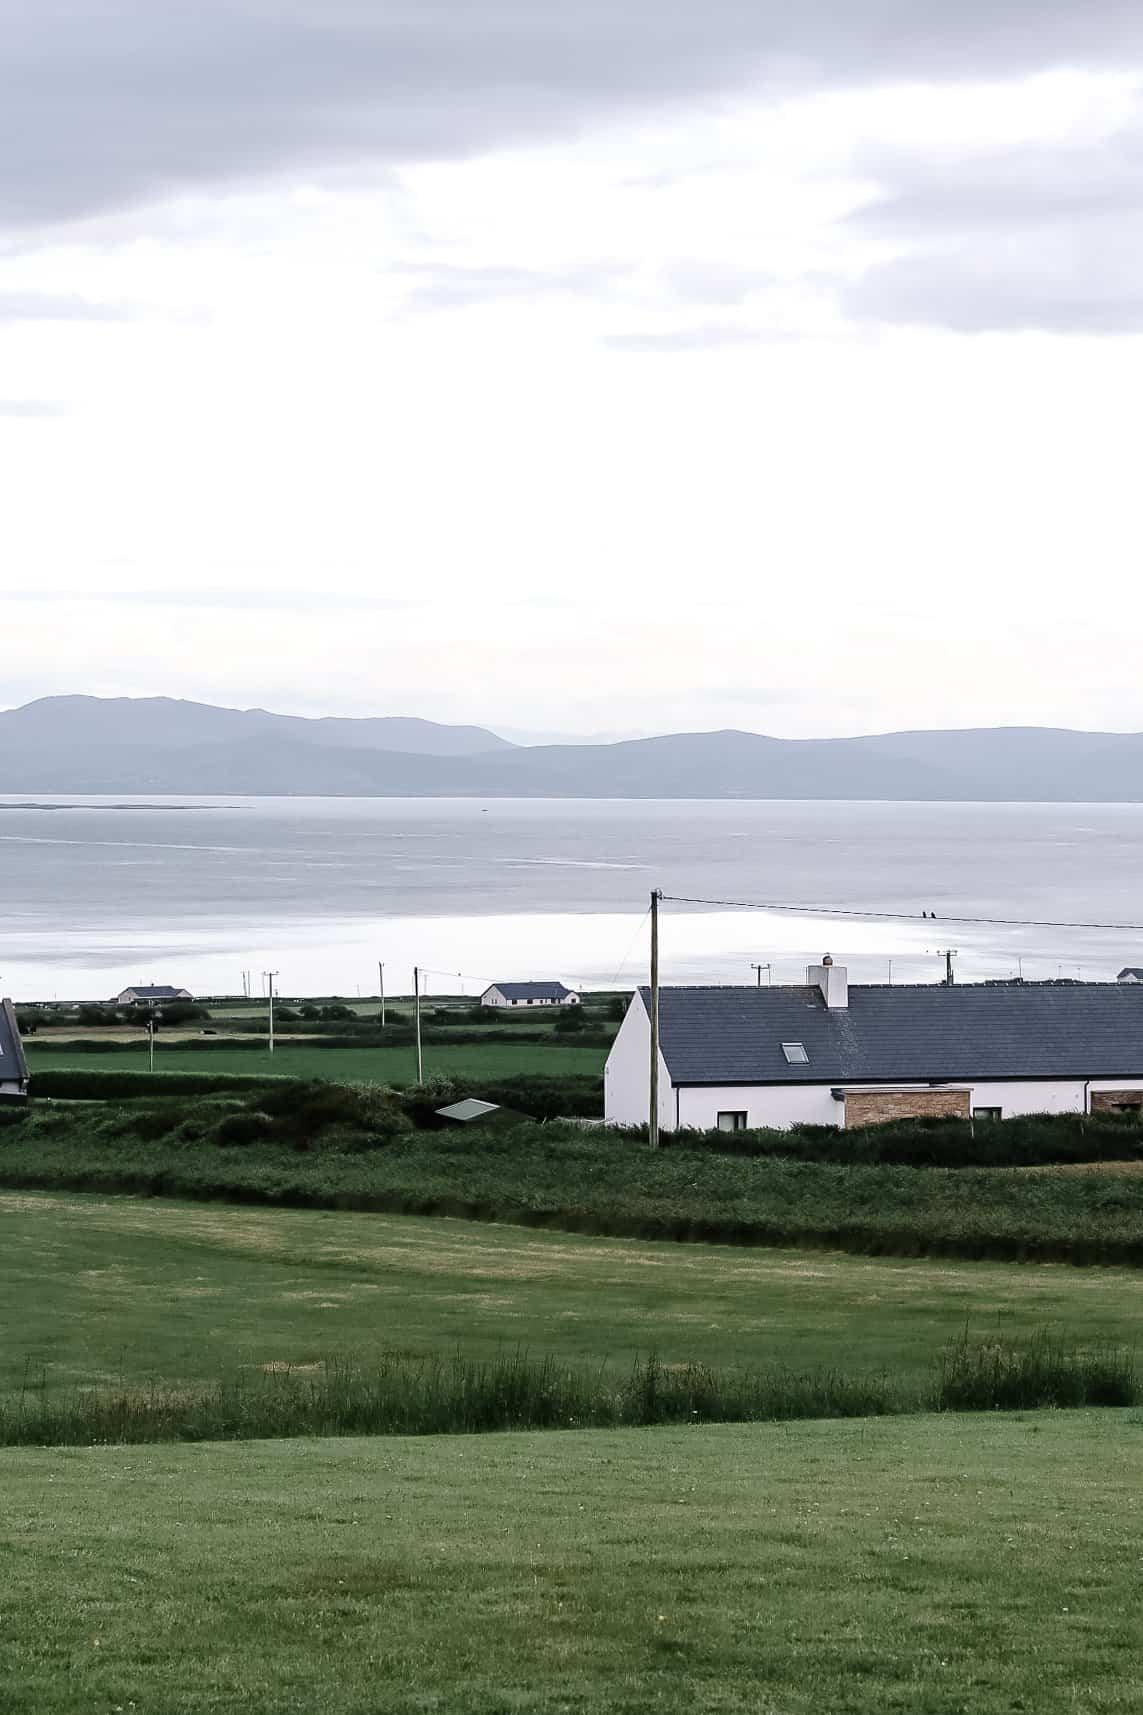 traditional Irish landscape overlooking the rolling green hills, white cottages and Ballyheigue Bay in co. Kerry, Ireland.